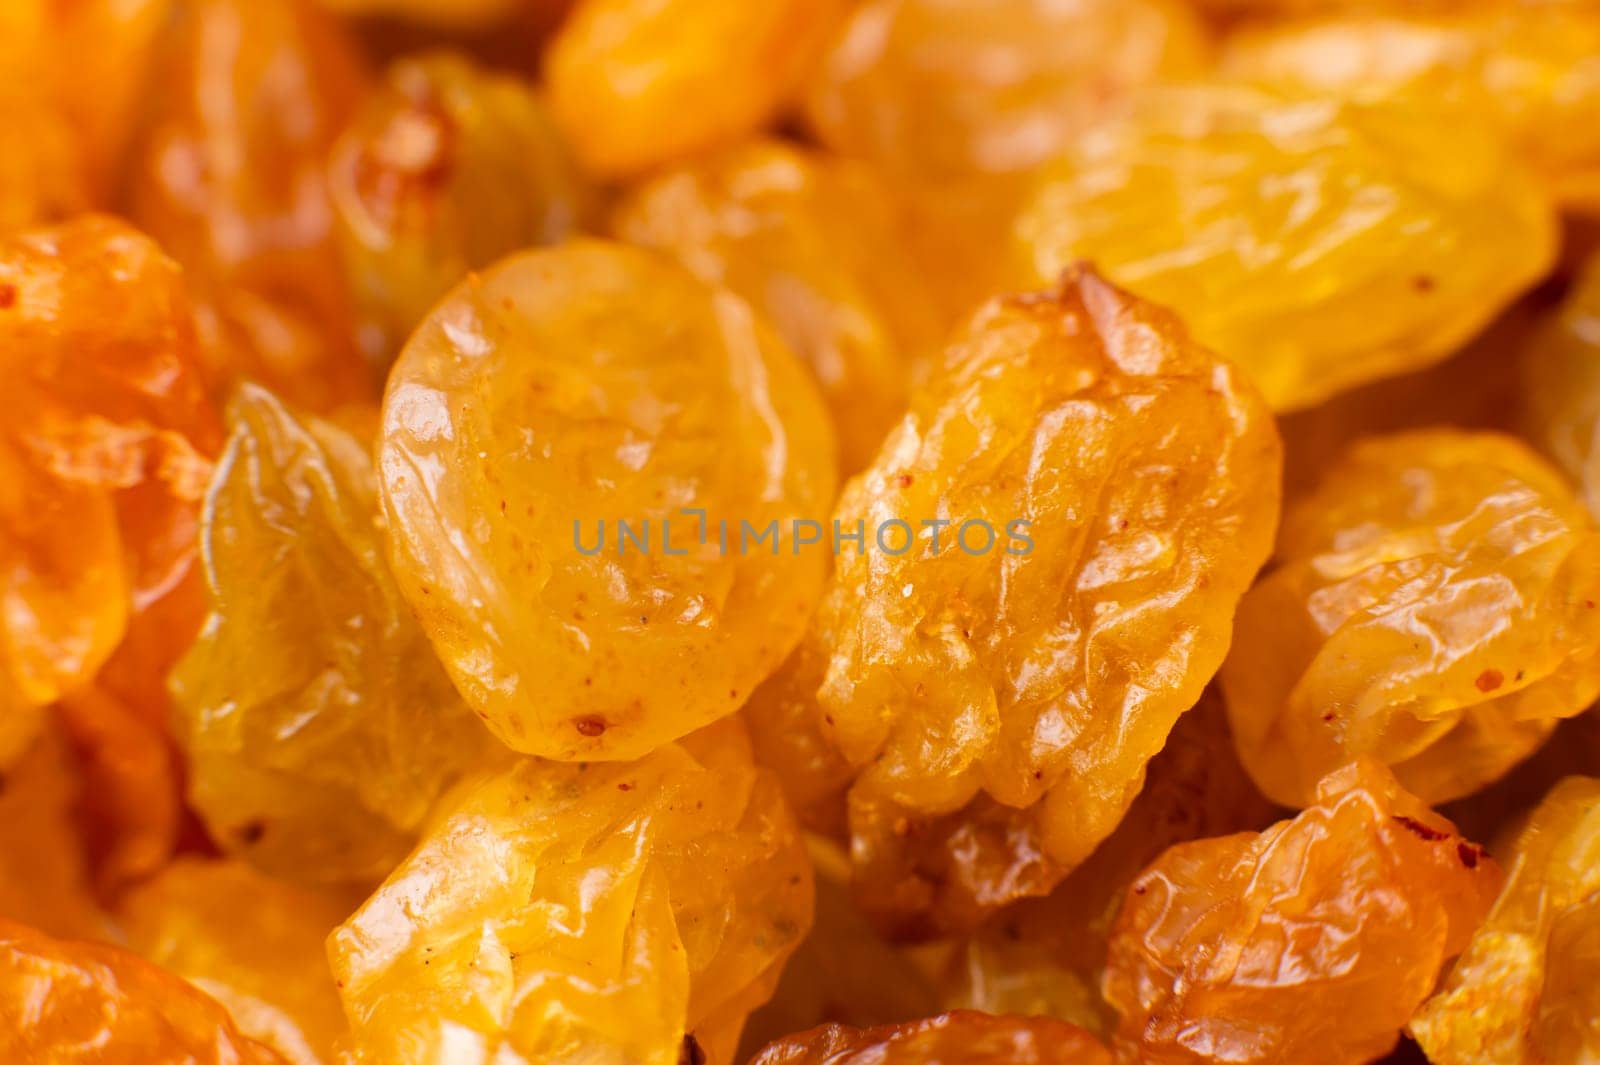 background of raisins in sale in the shop of dried fruit.